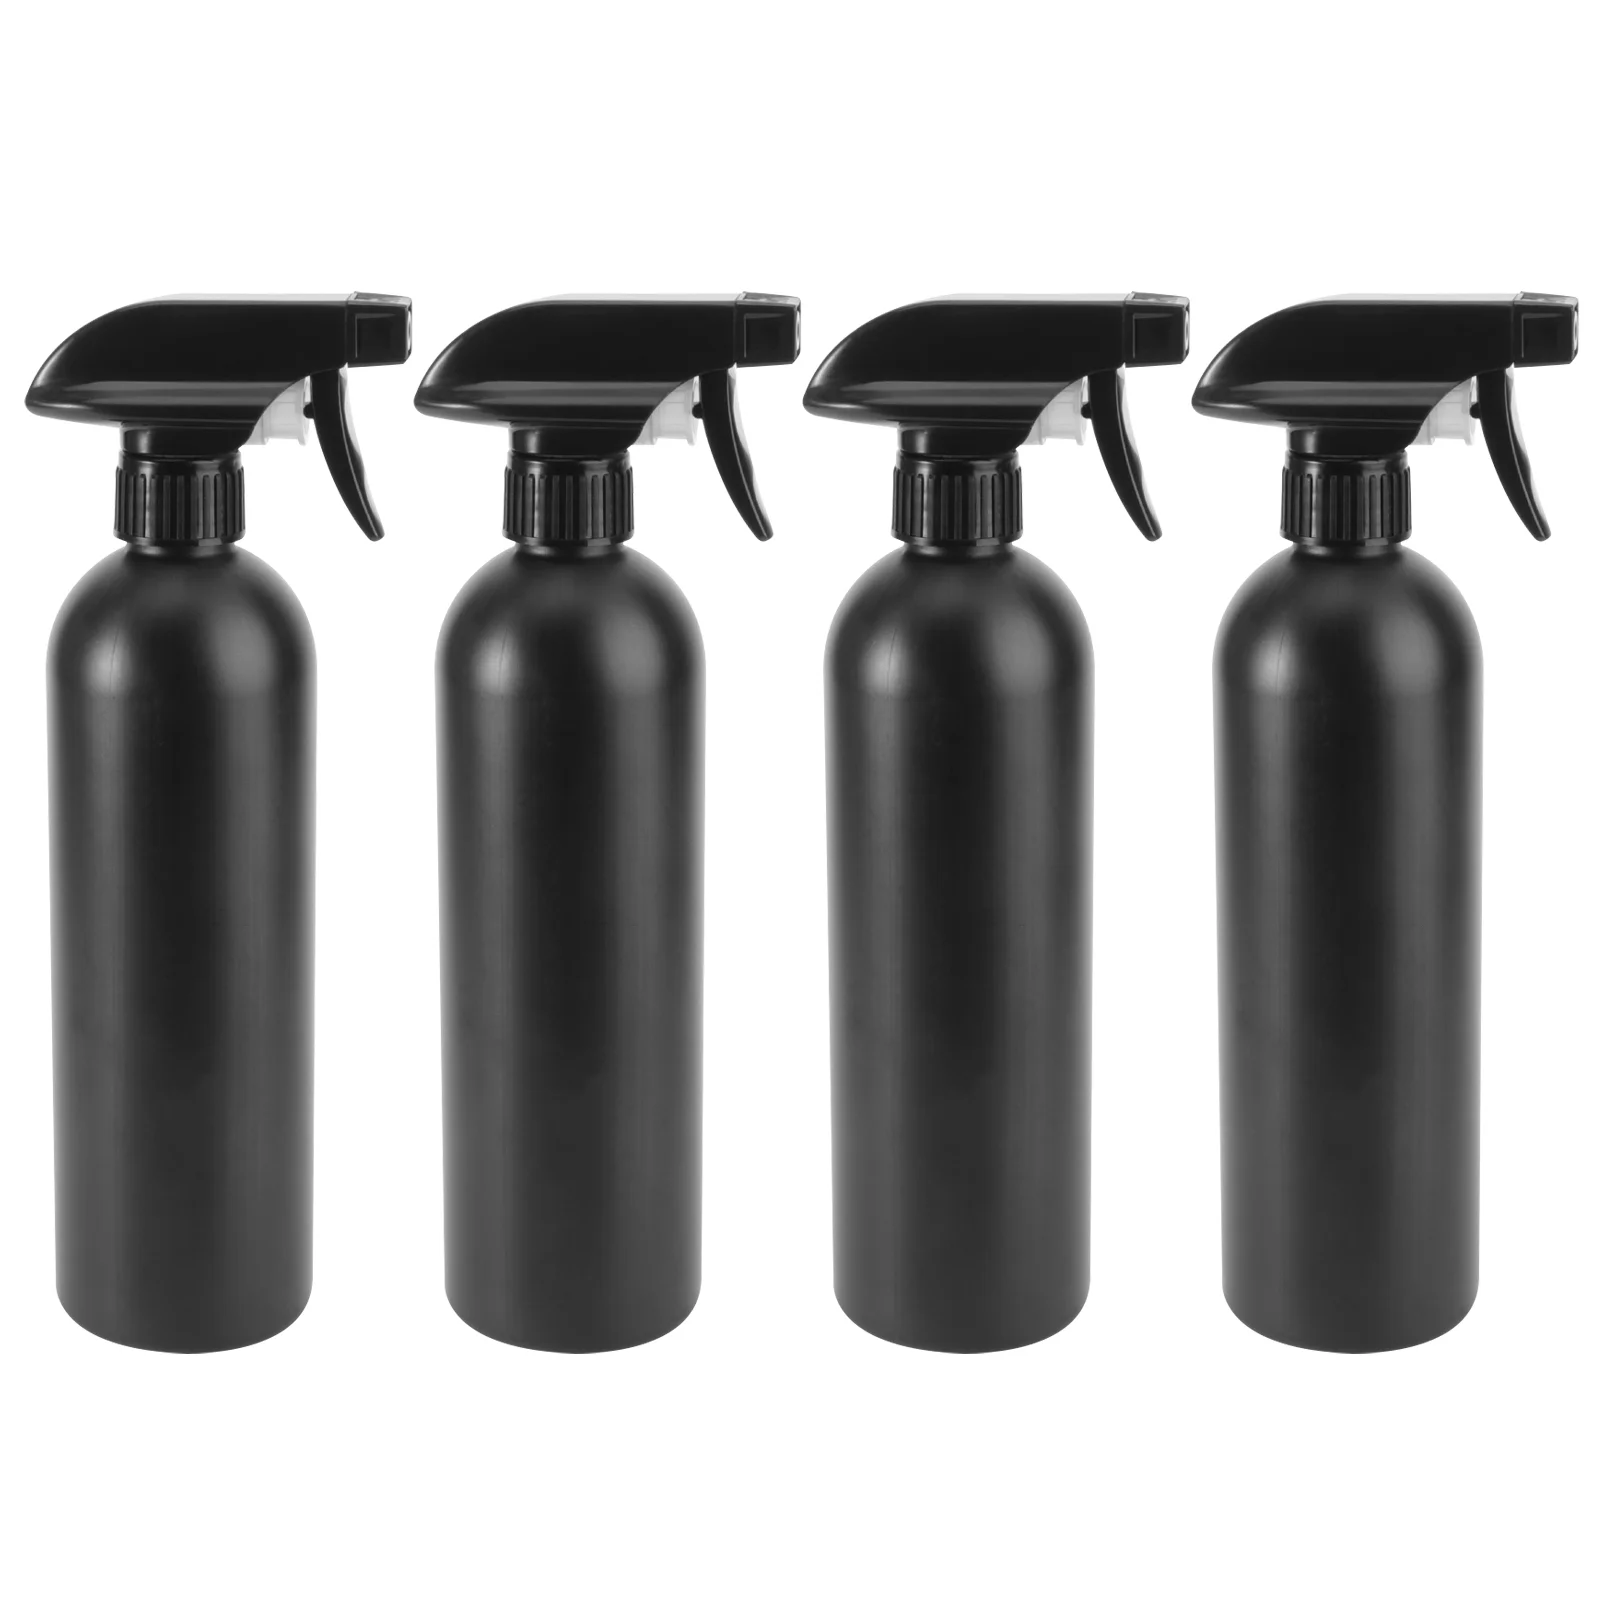 Refillable Plastic Spray Bottles for Cleaning Mist Hair and Aromatherapy – Trigger Sprayers for Liquid Jars and Empty Bottles